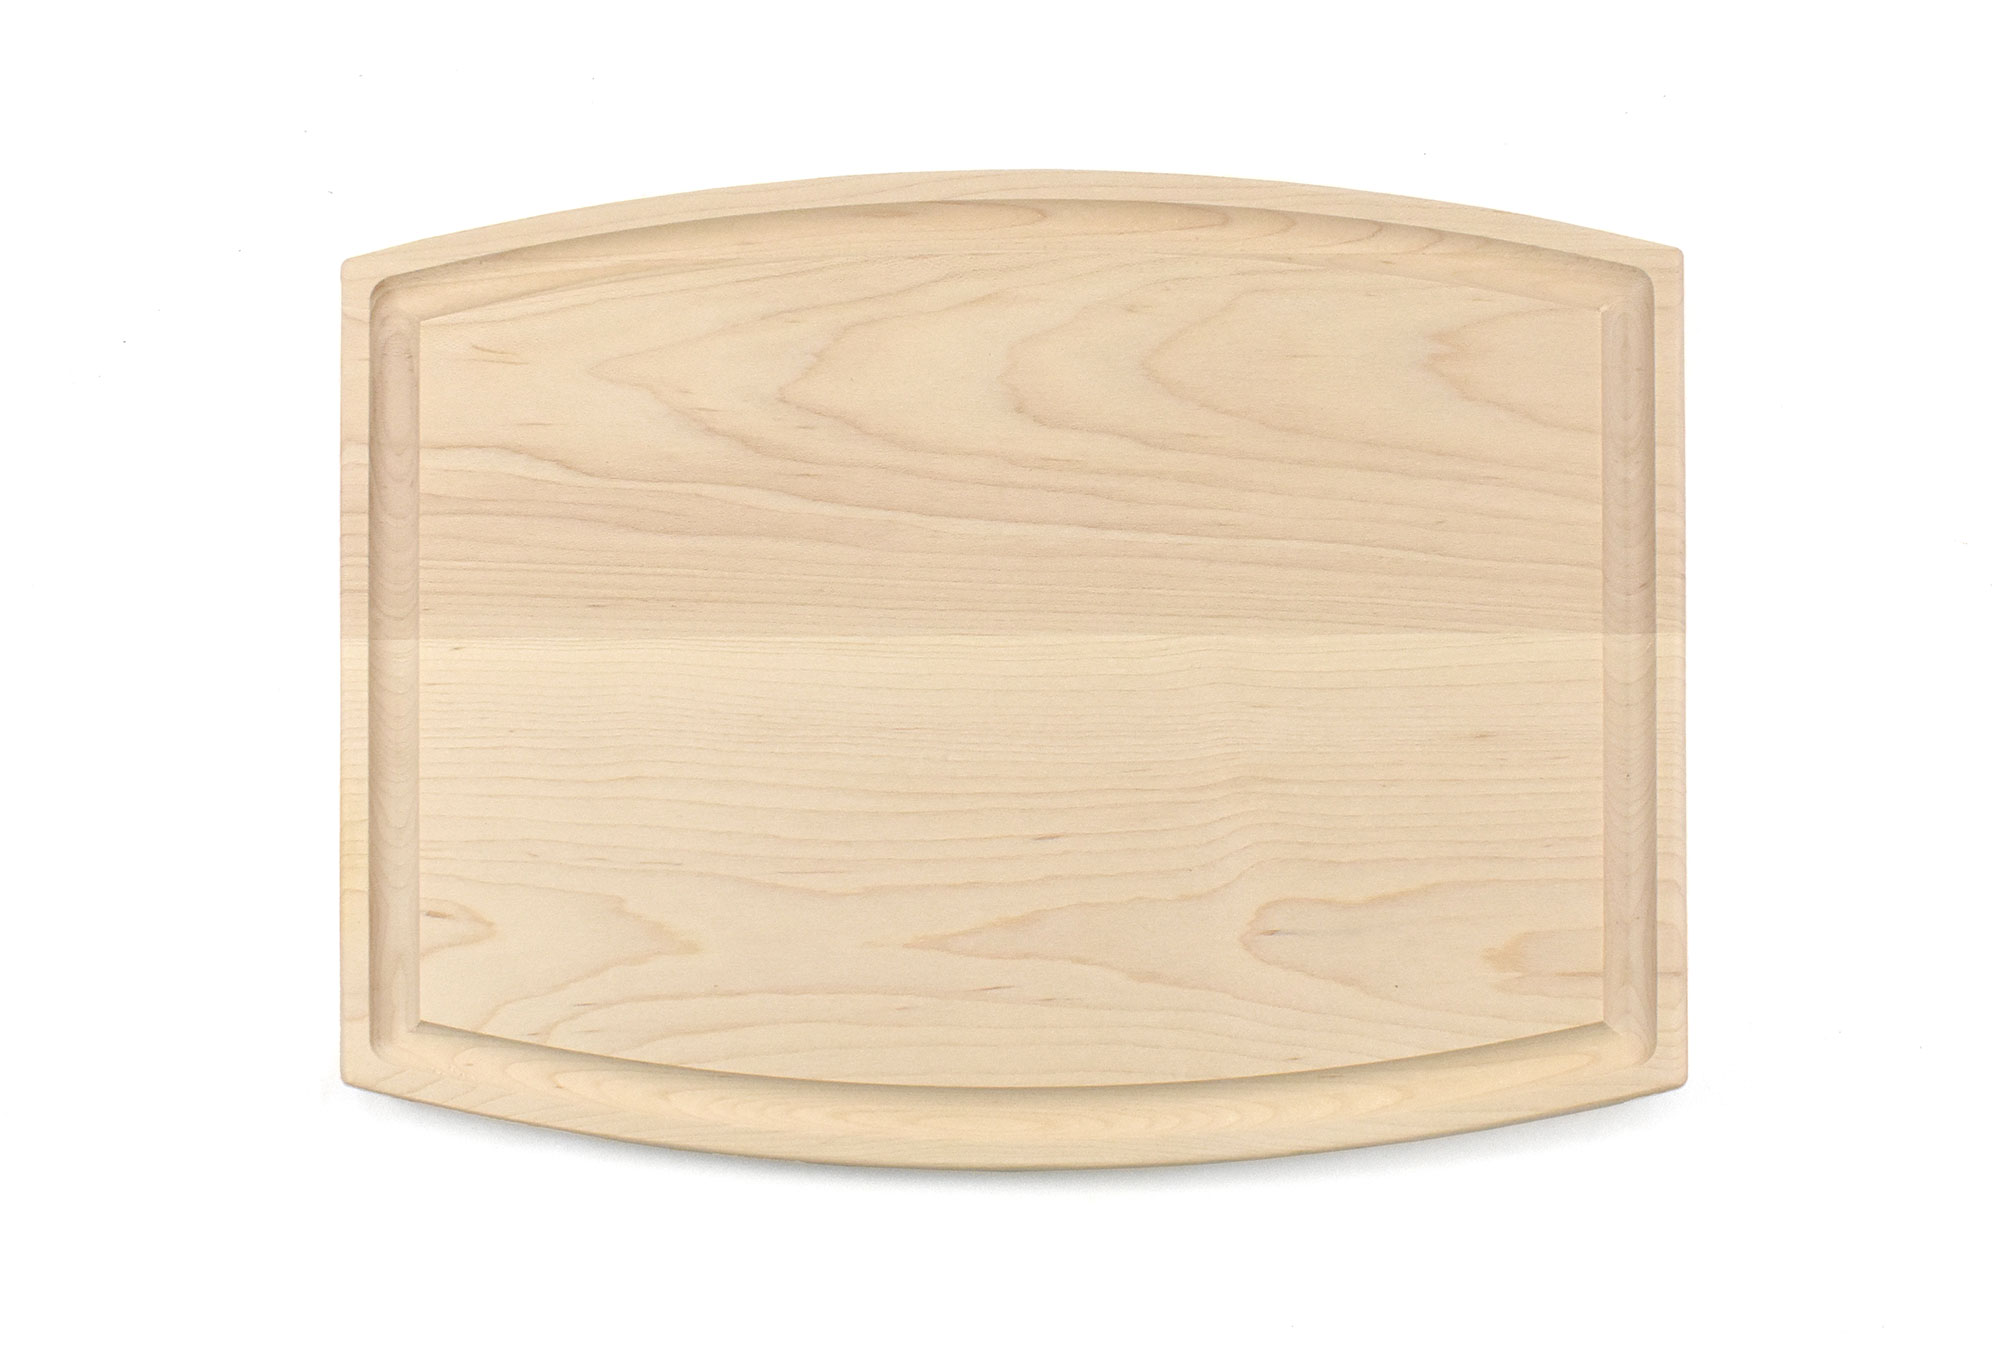 20 Wholesale cutting boards - Maple cutting board (Arched)